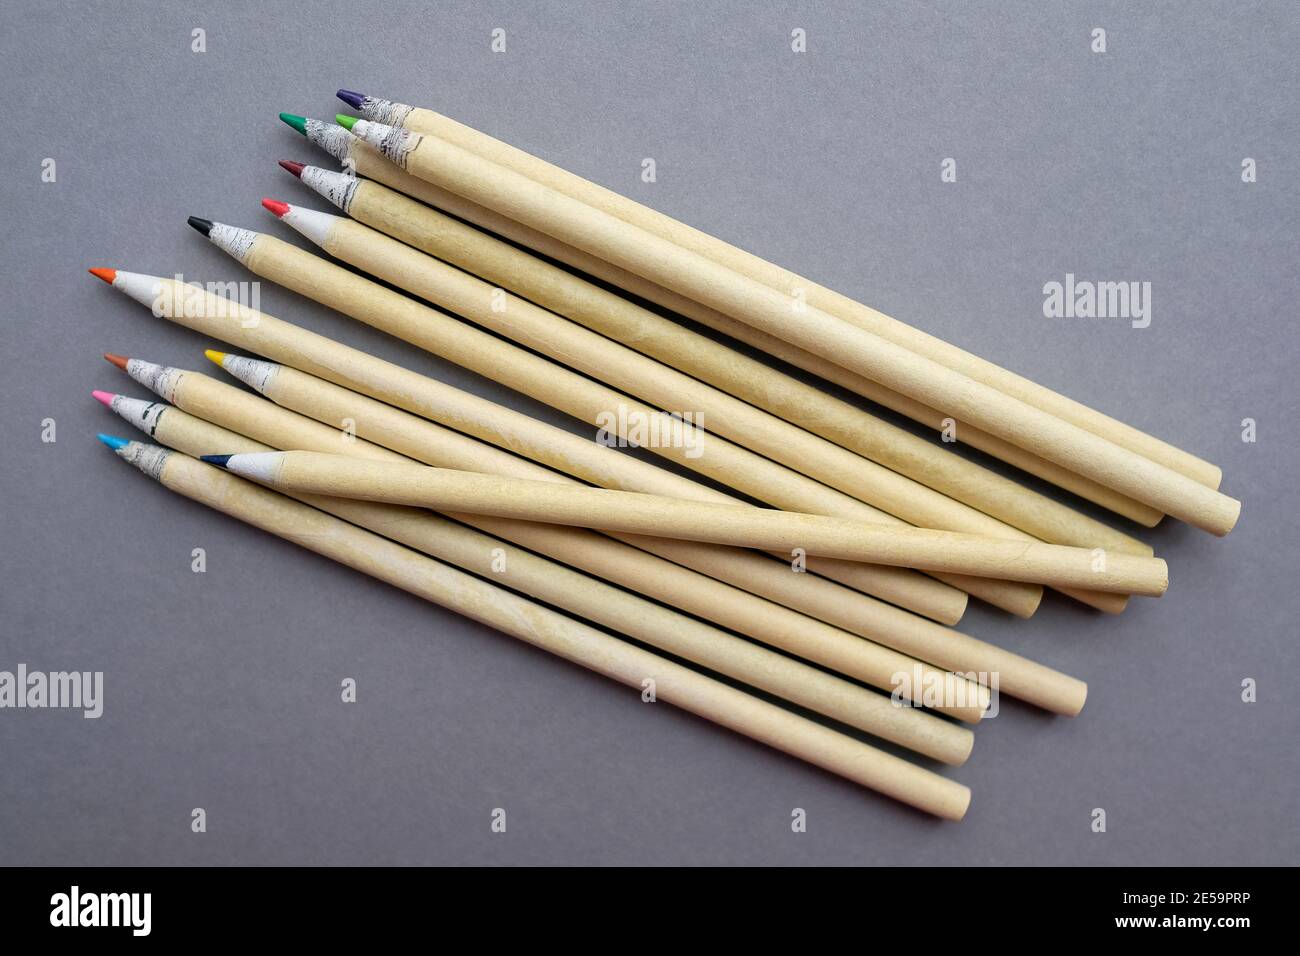 Colored eco-friendly pencils on gray background. Multiple stationery. Stock Photo